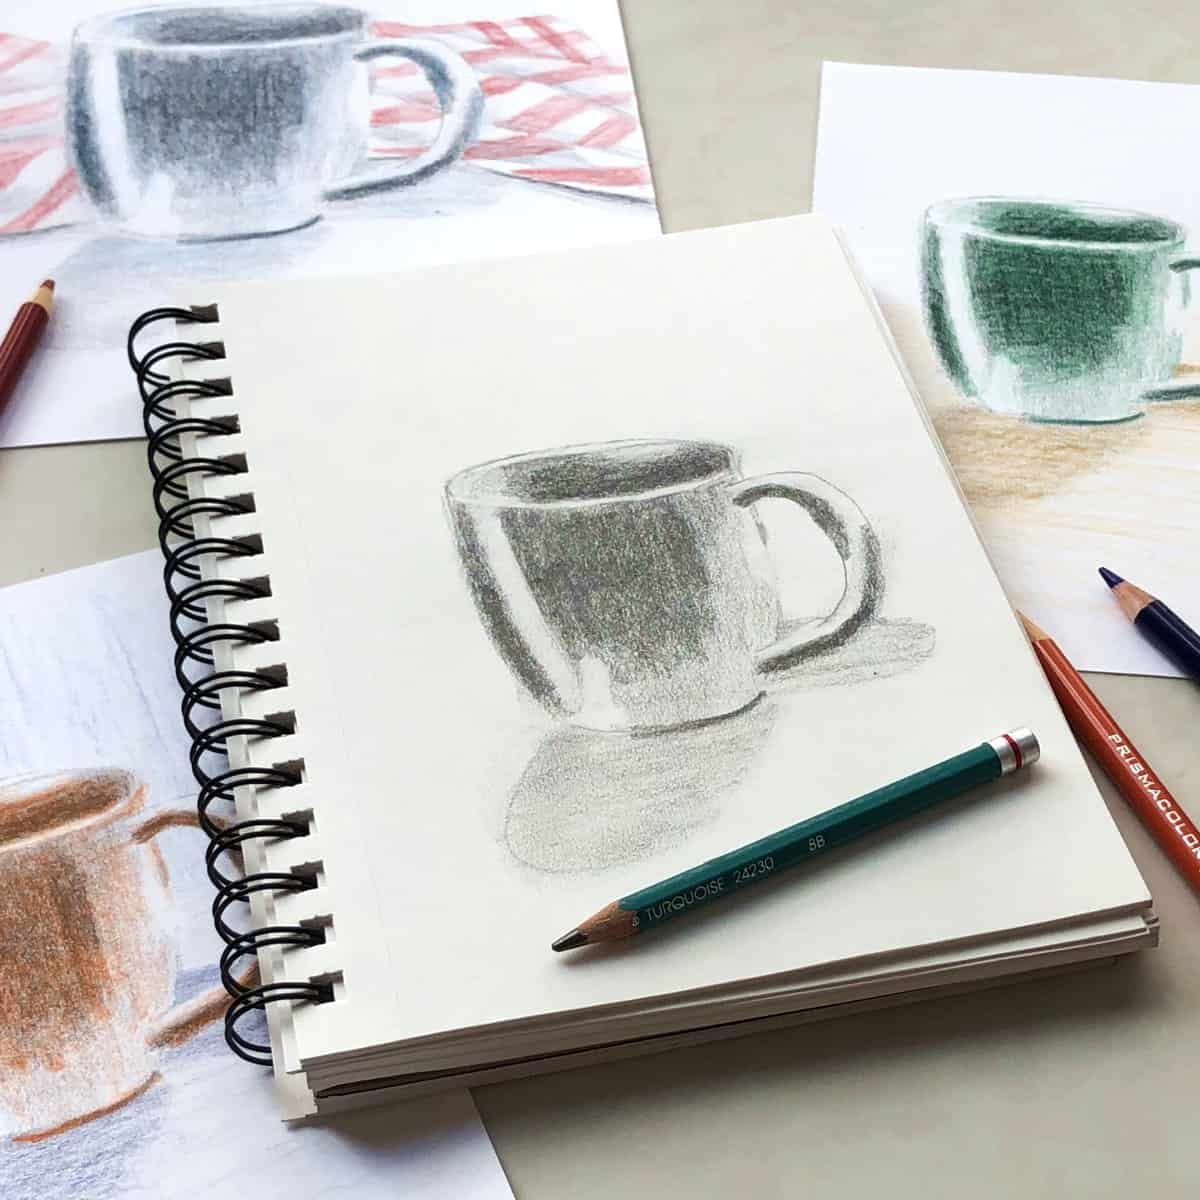 Drawing of a coffee mug in pencil with colored pencil drawings in the background.